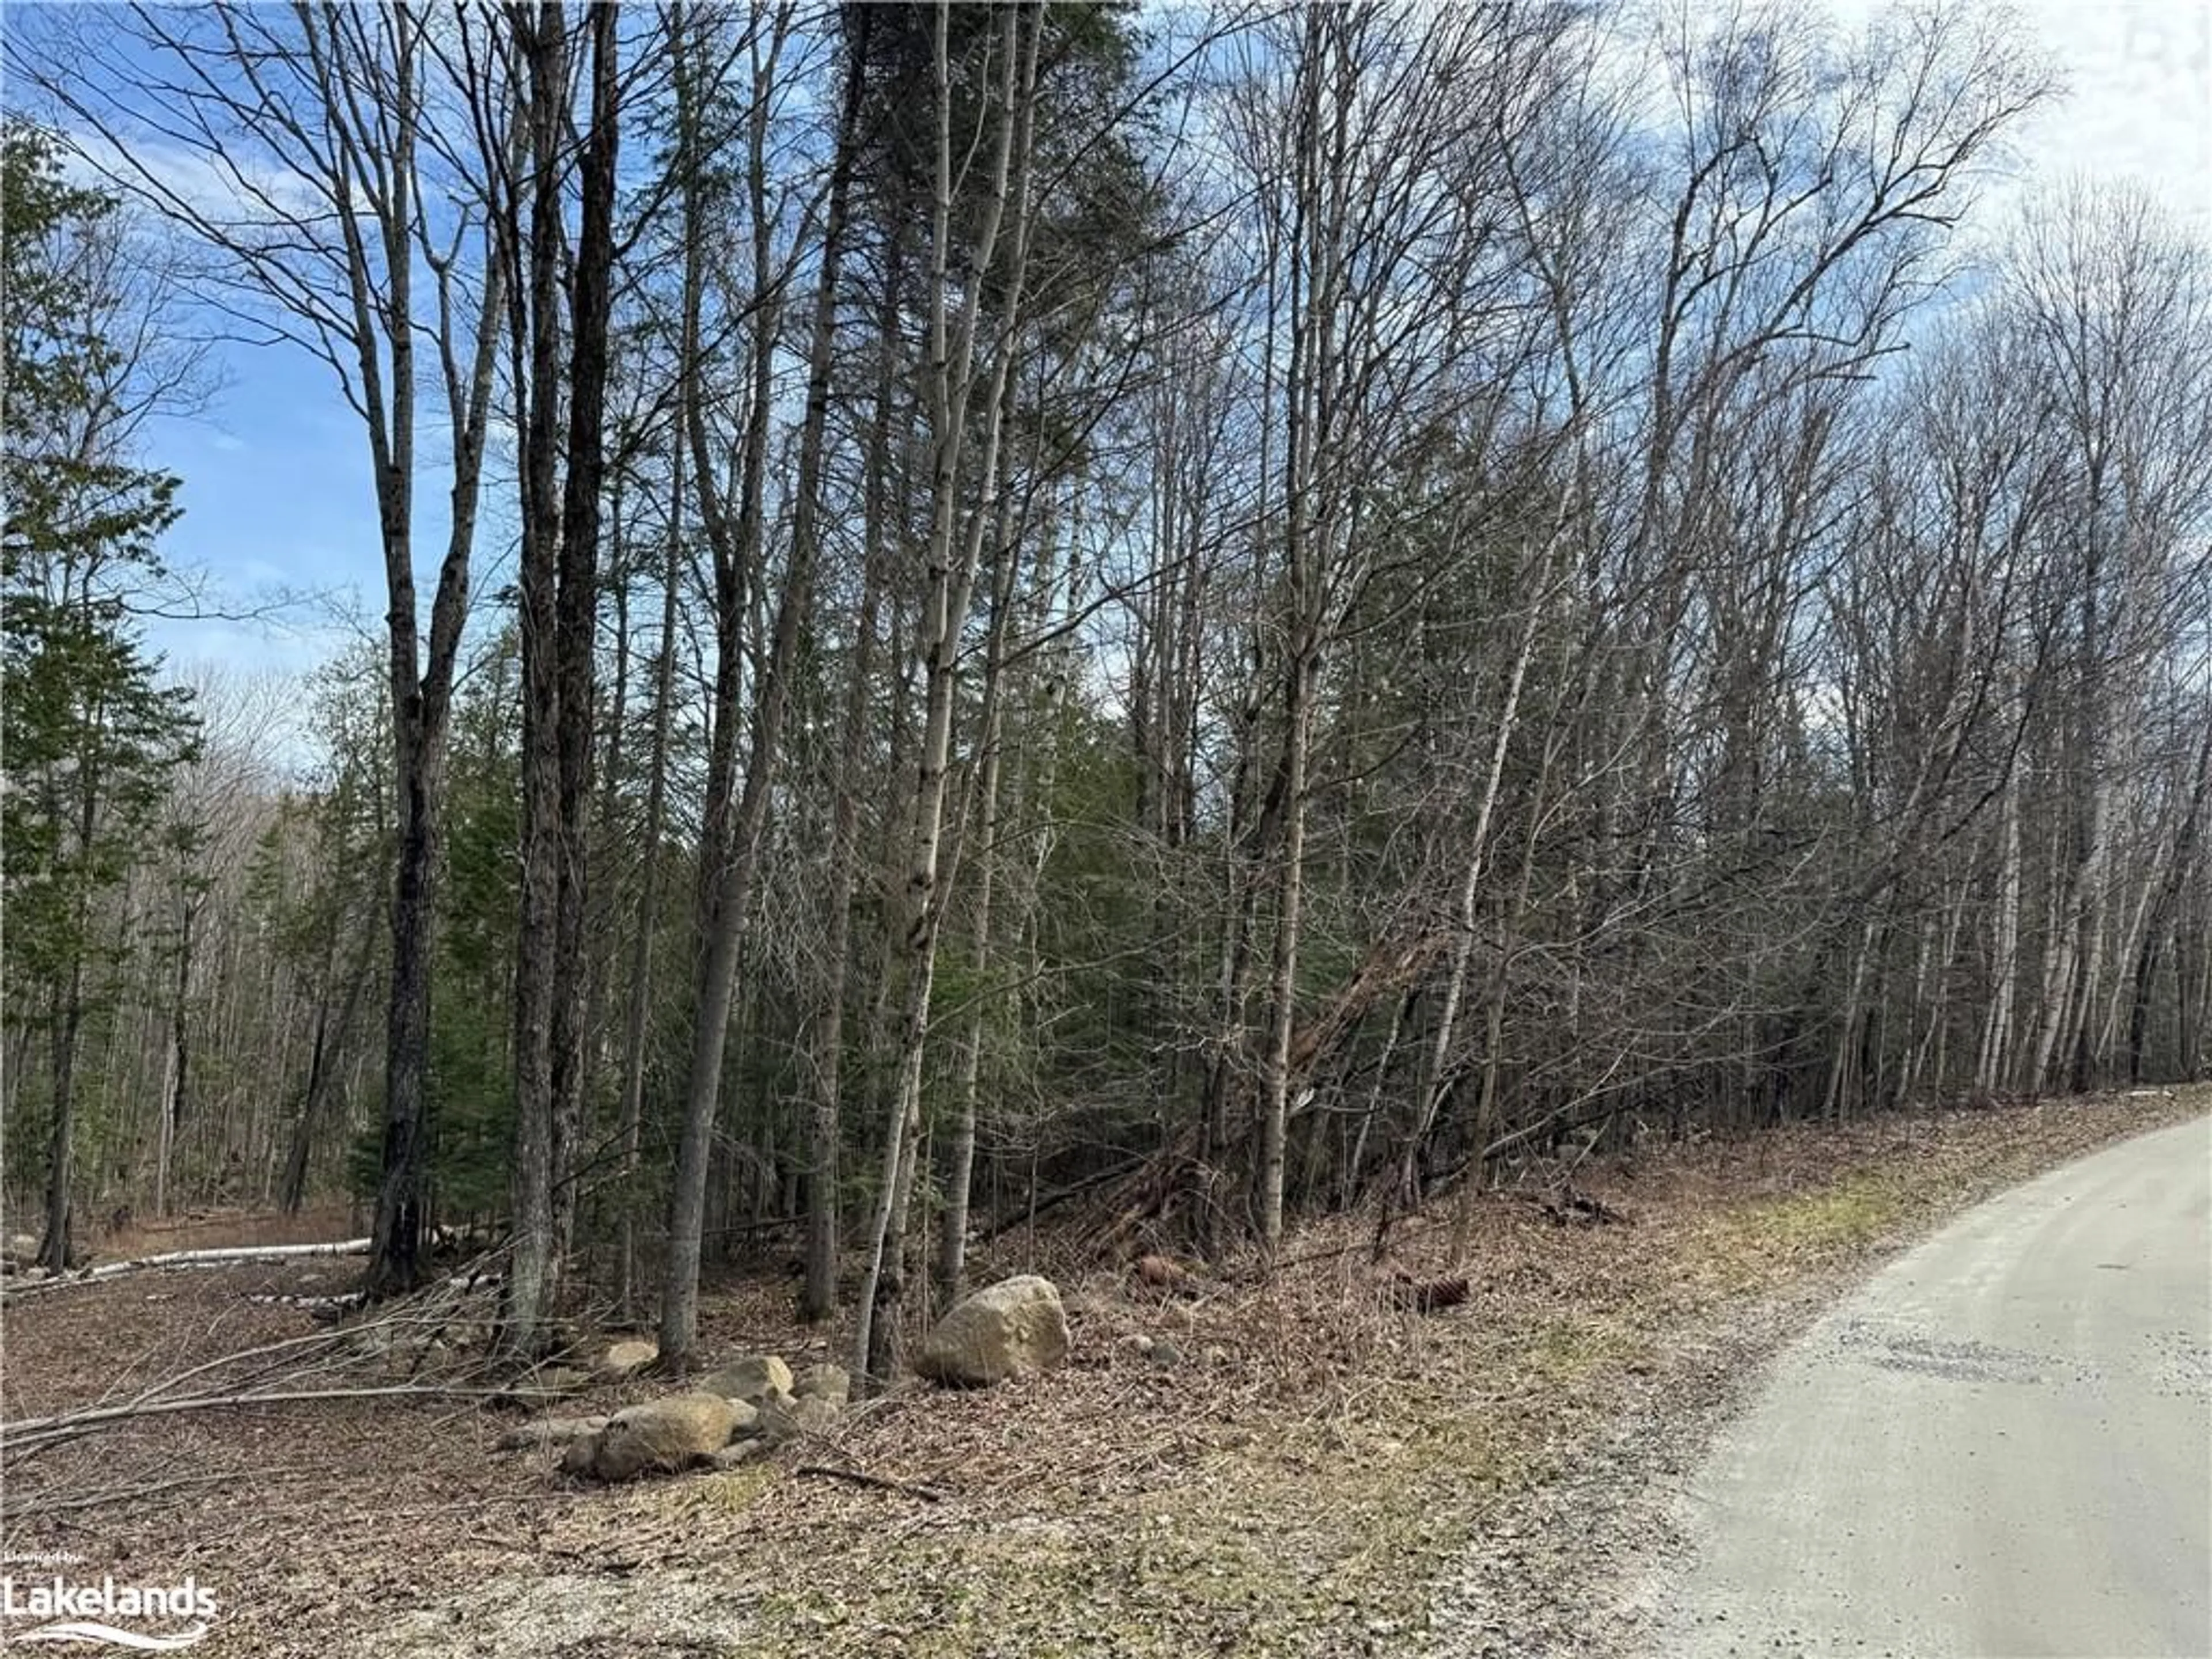 Forest view for 0 North Dr, Eagle Lake Ontario K0M 1M0